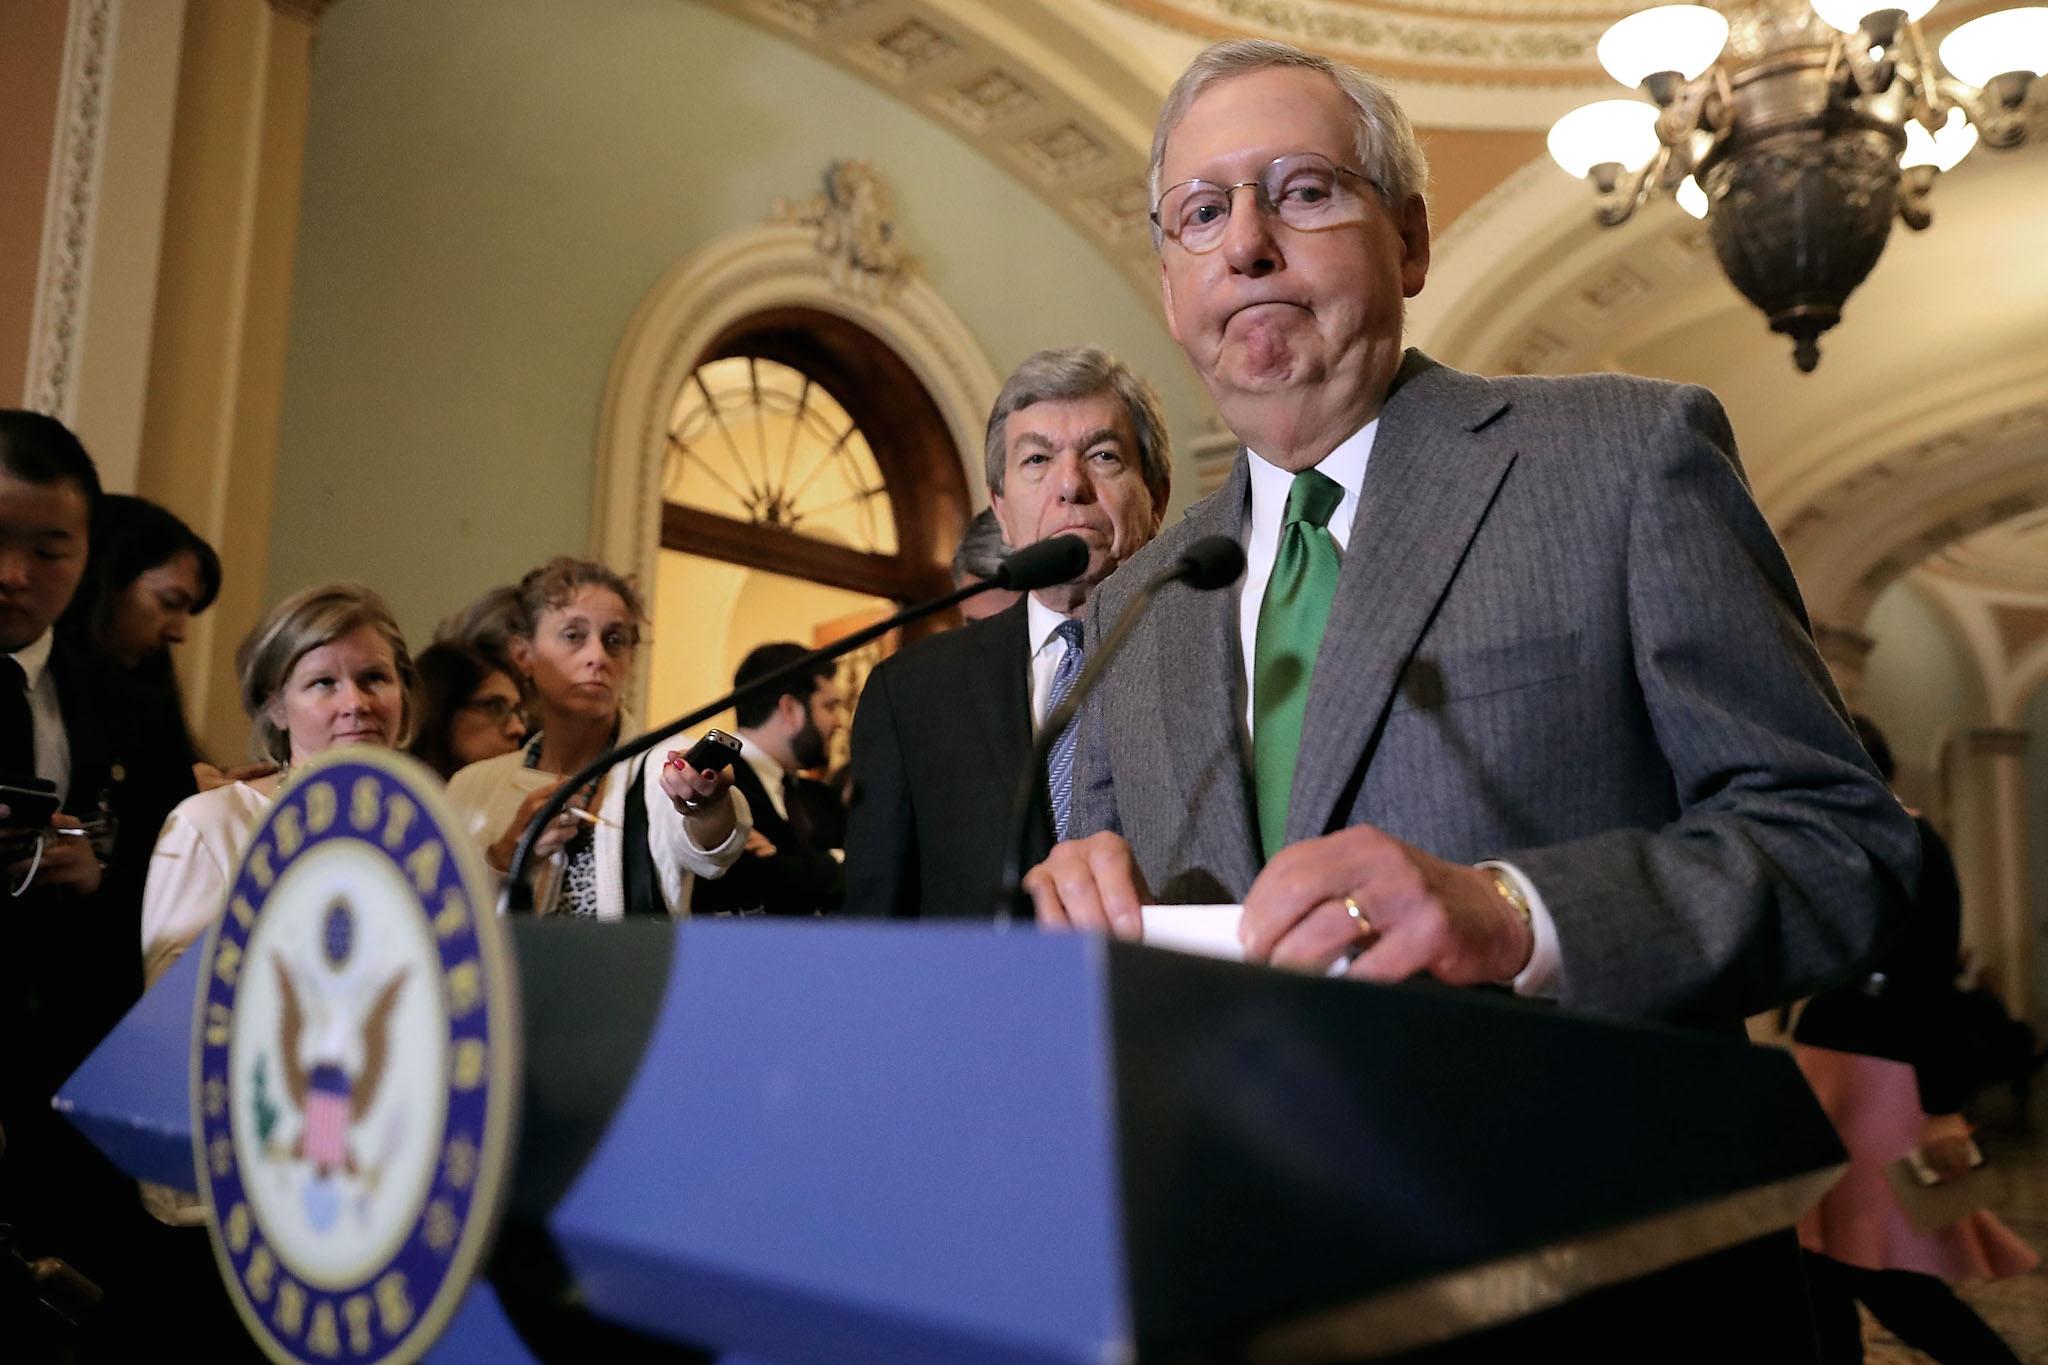 Senate Majority Leader Mitch McConnell (Photo by Chip Somodevilla/Getty Images)